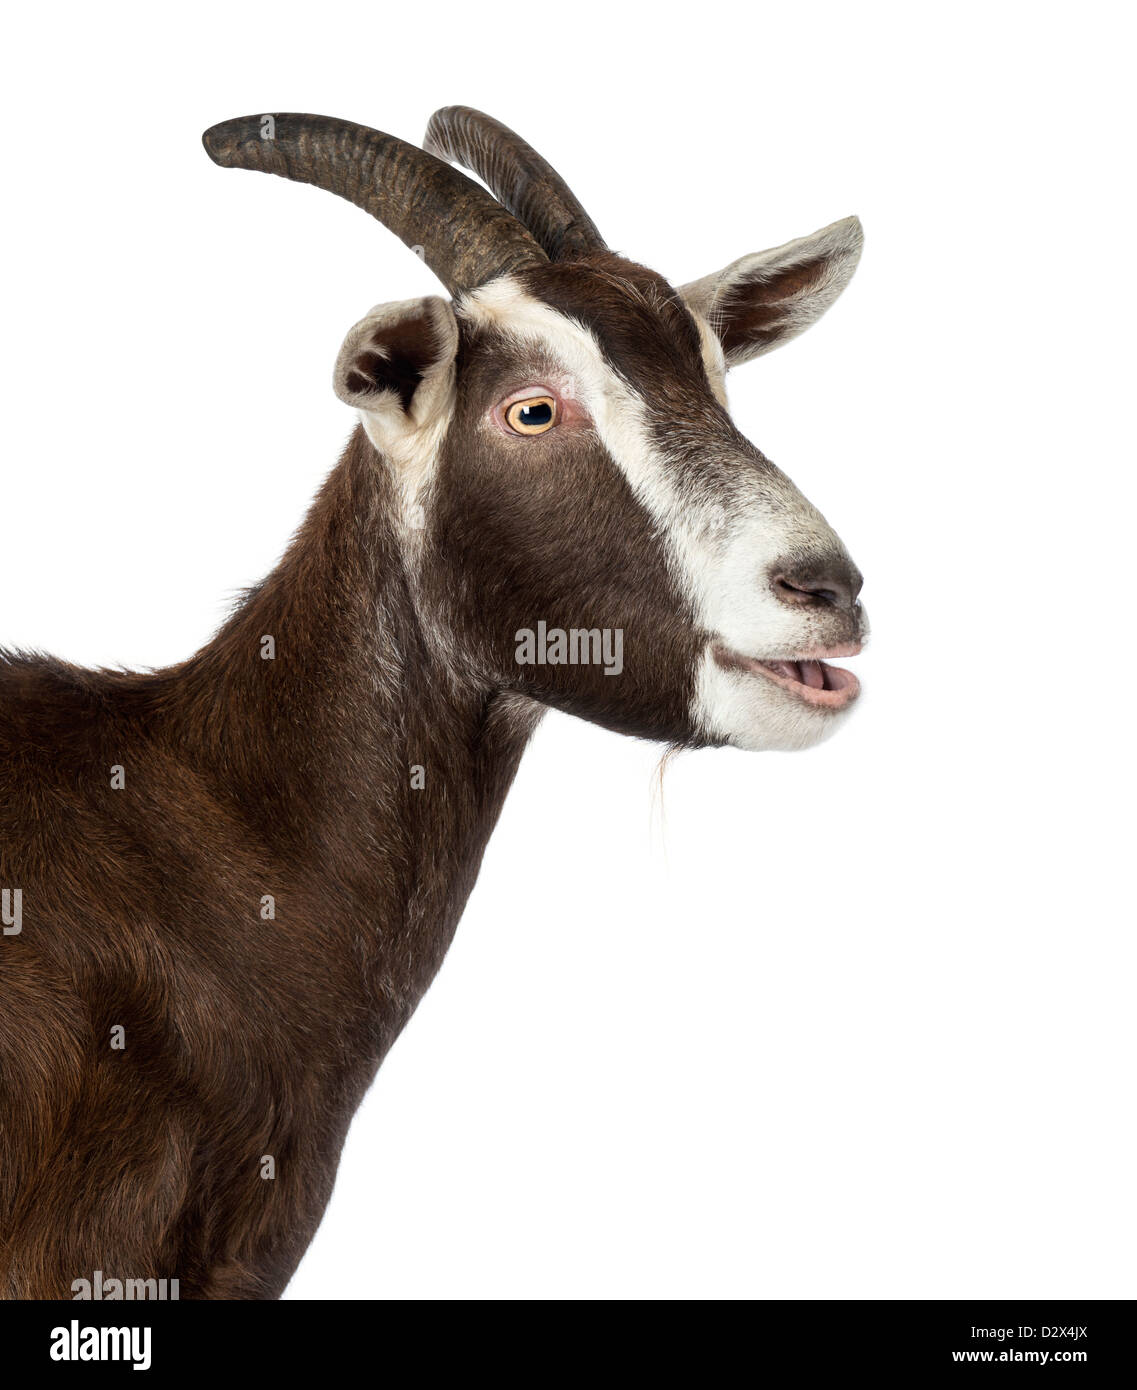 Close-up of a Toggenburg goat bleating in front of white background Stock Photo